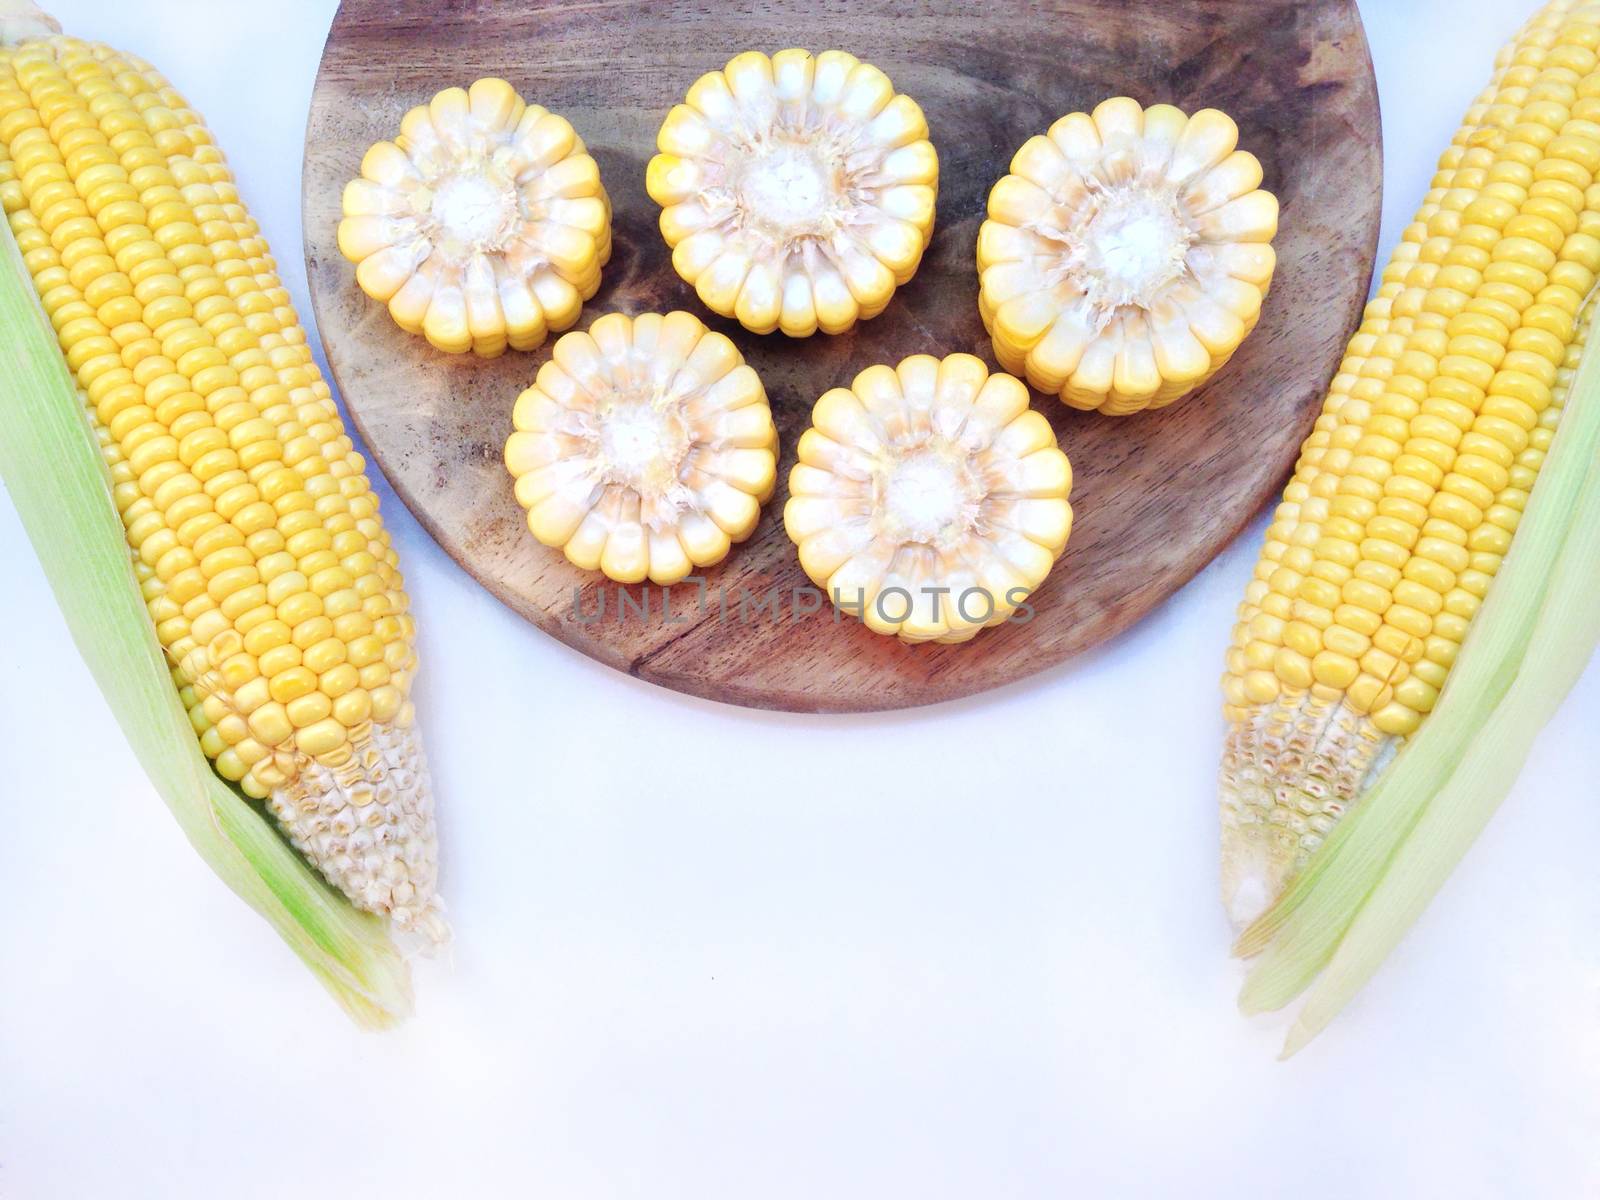 Corn with cutting board by Bowonpat